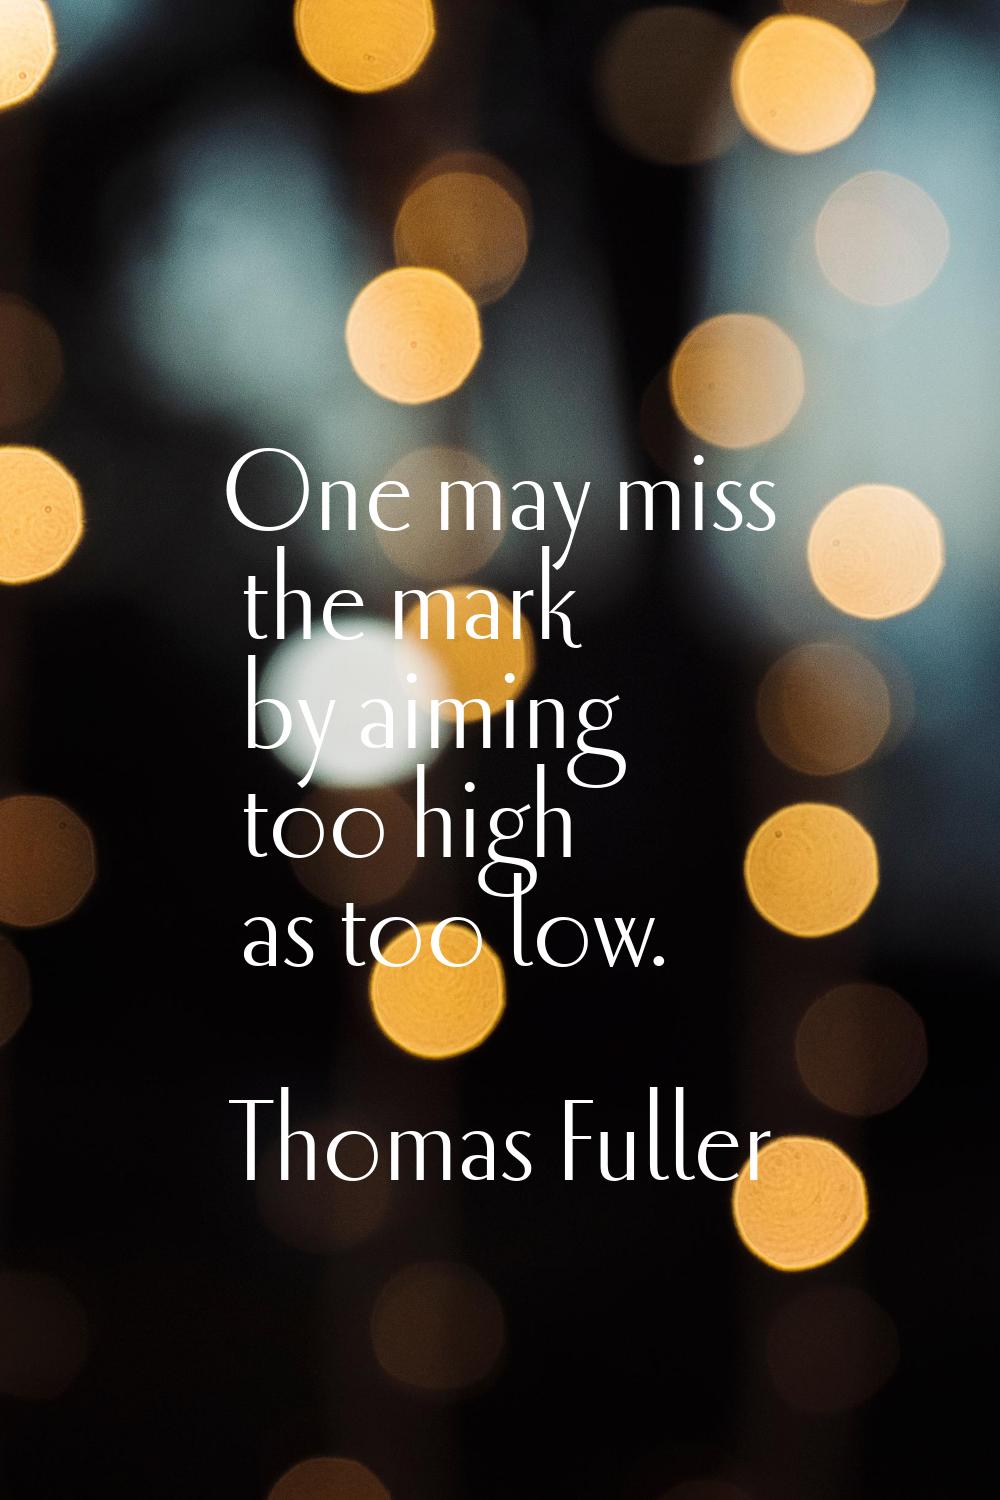 One may miss the mark by aiming too high as too low.